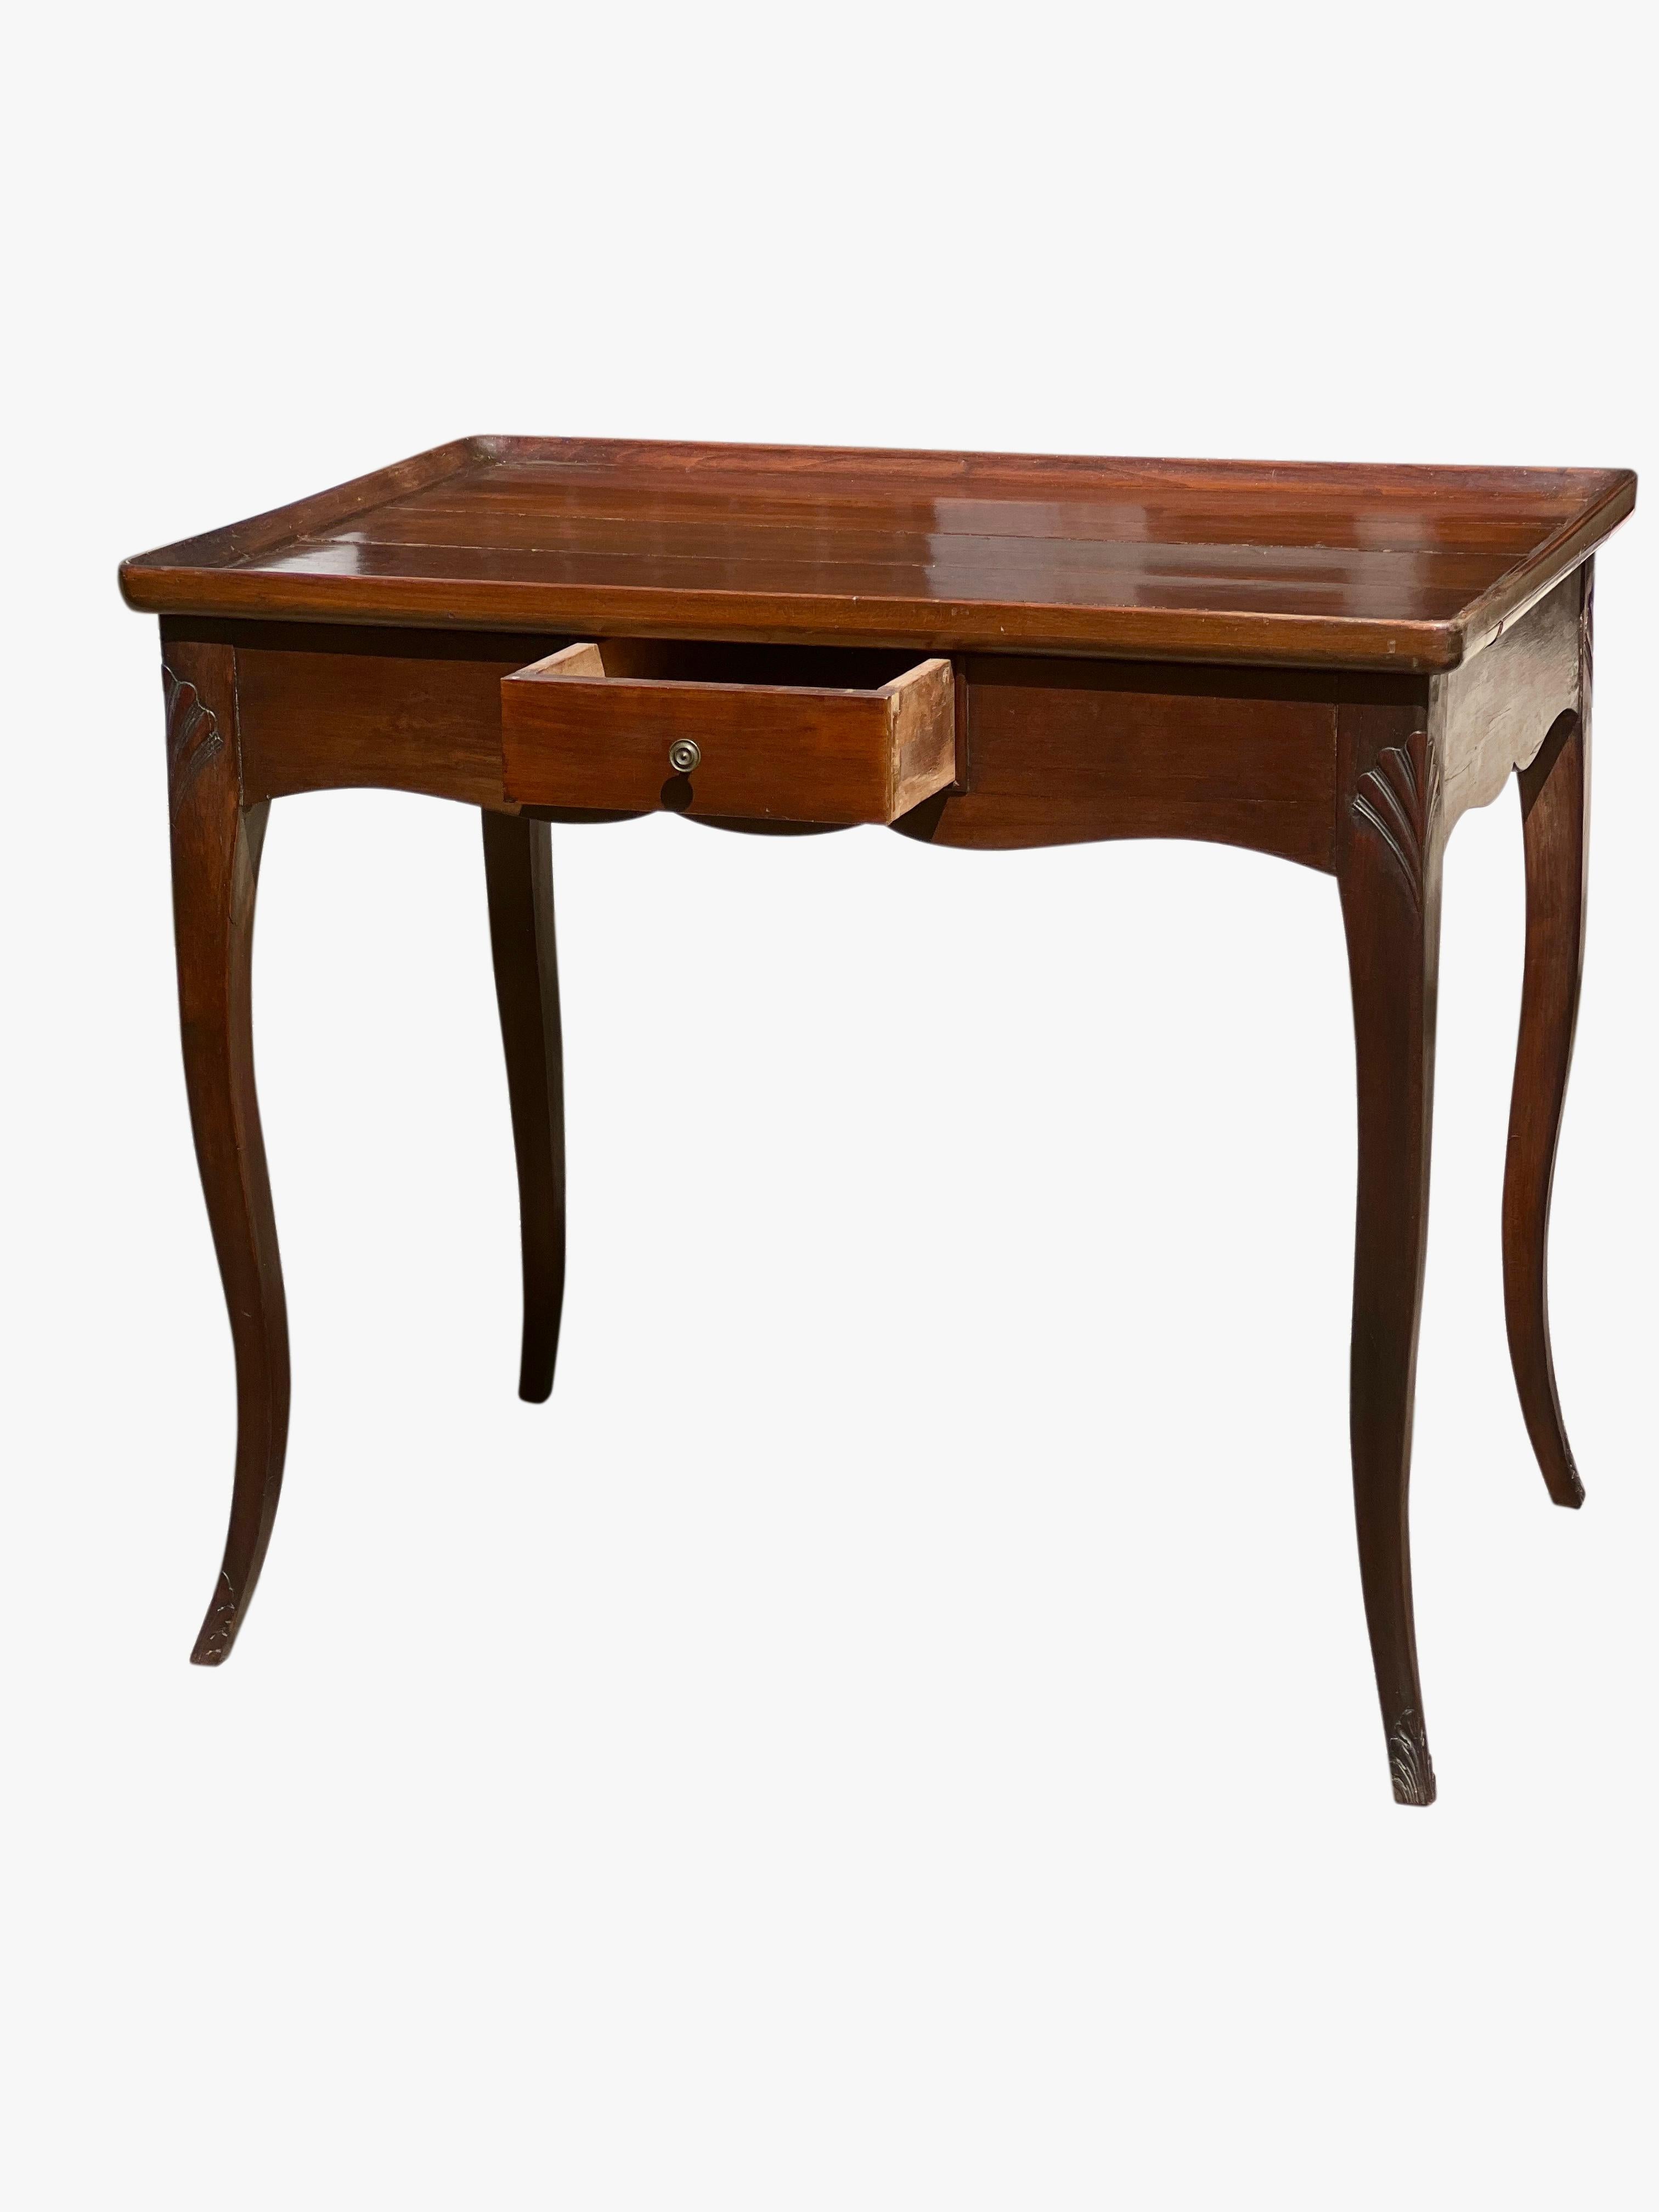 Antique French Provincial mahogany Louis XV style tea table, circa 1900.

This lovely table has been meticulously cared for and has beautiful patina with a gorgeous, satin-like sheen. The slender cabriole legs have a gentle taper with stylized